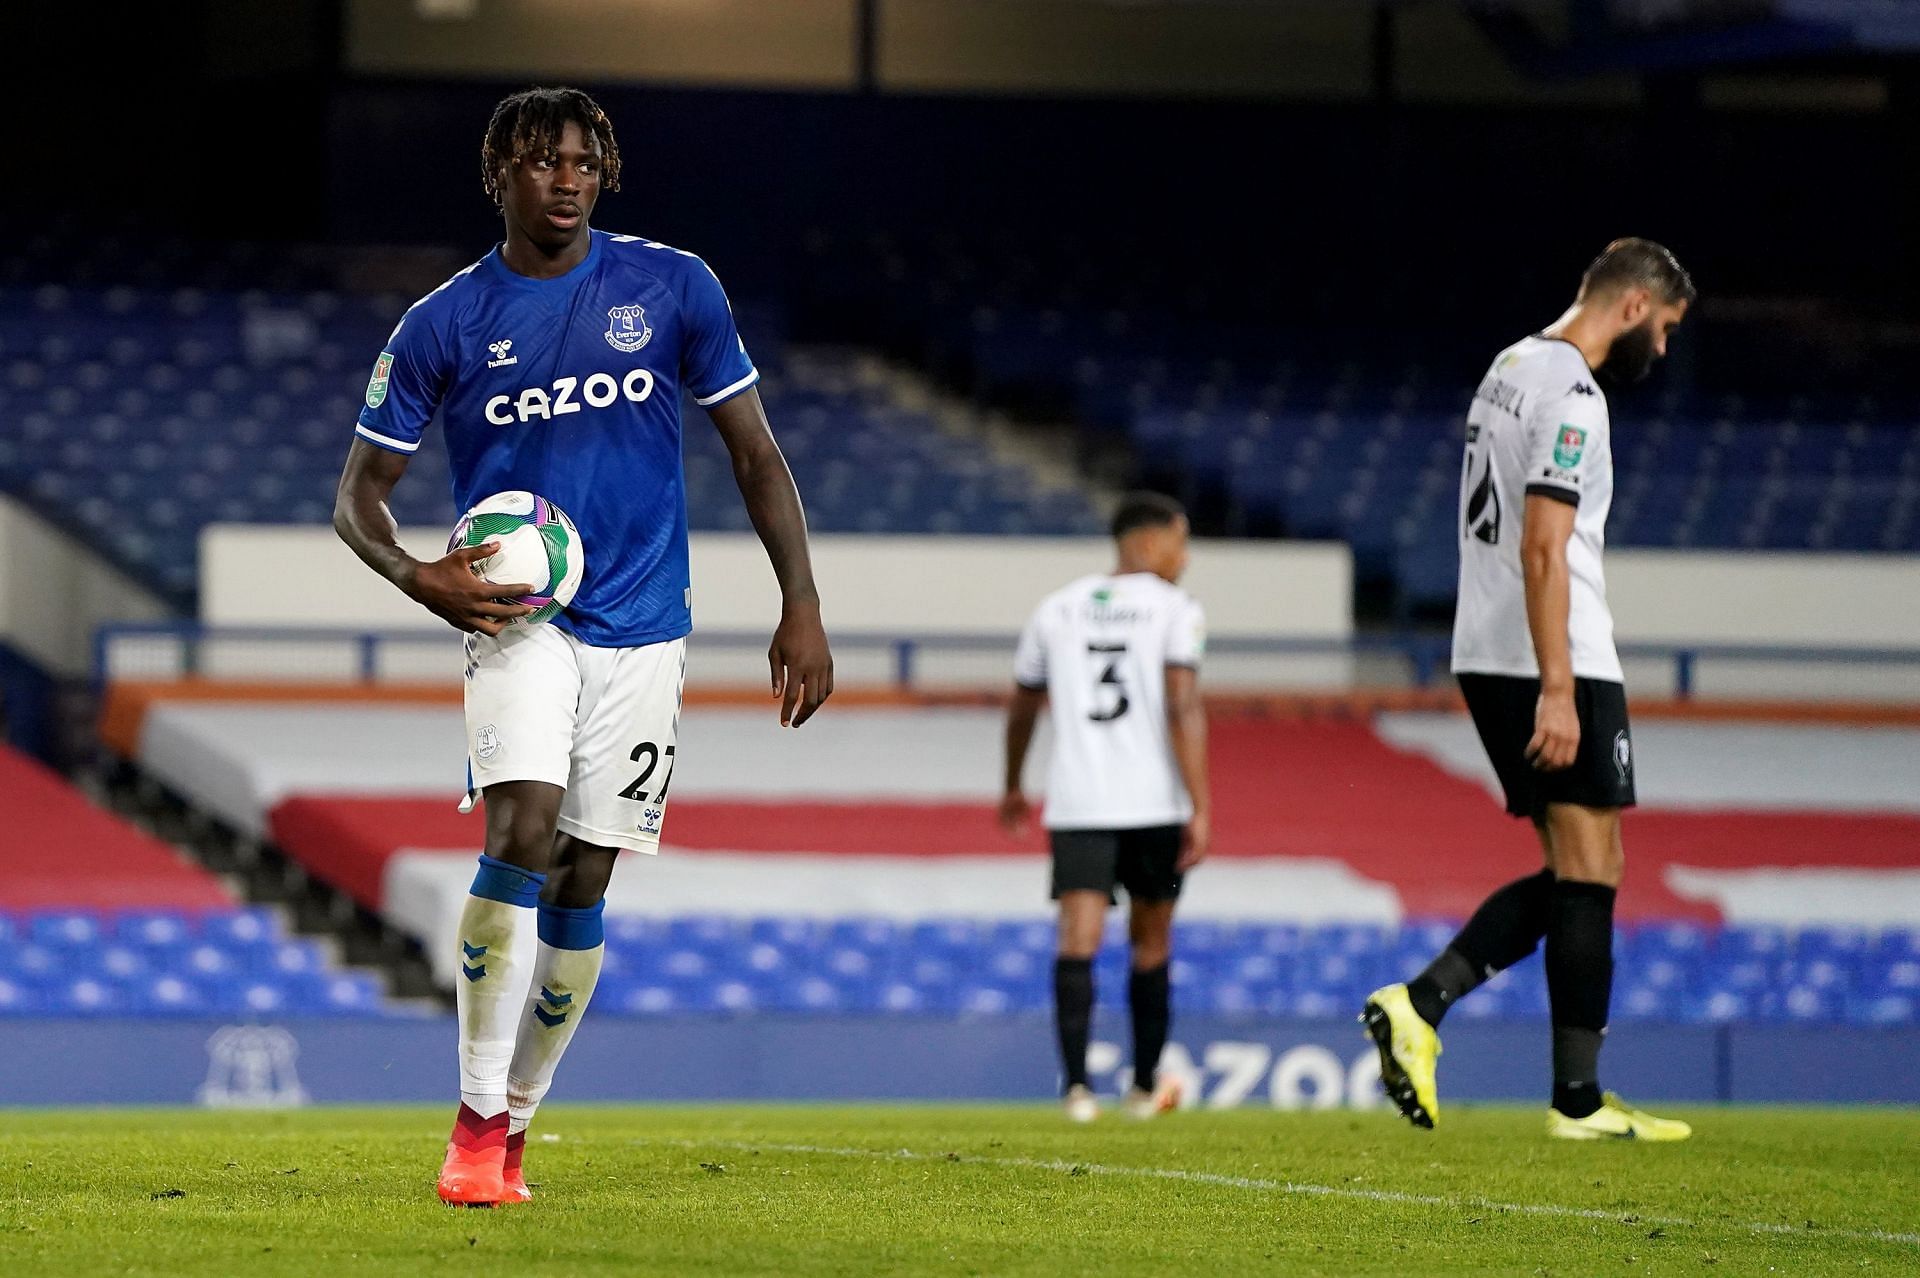 Moise Kean struggled to cope with English football during his time at Everton.